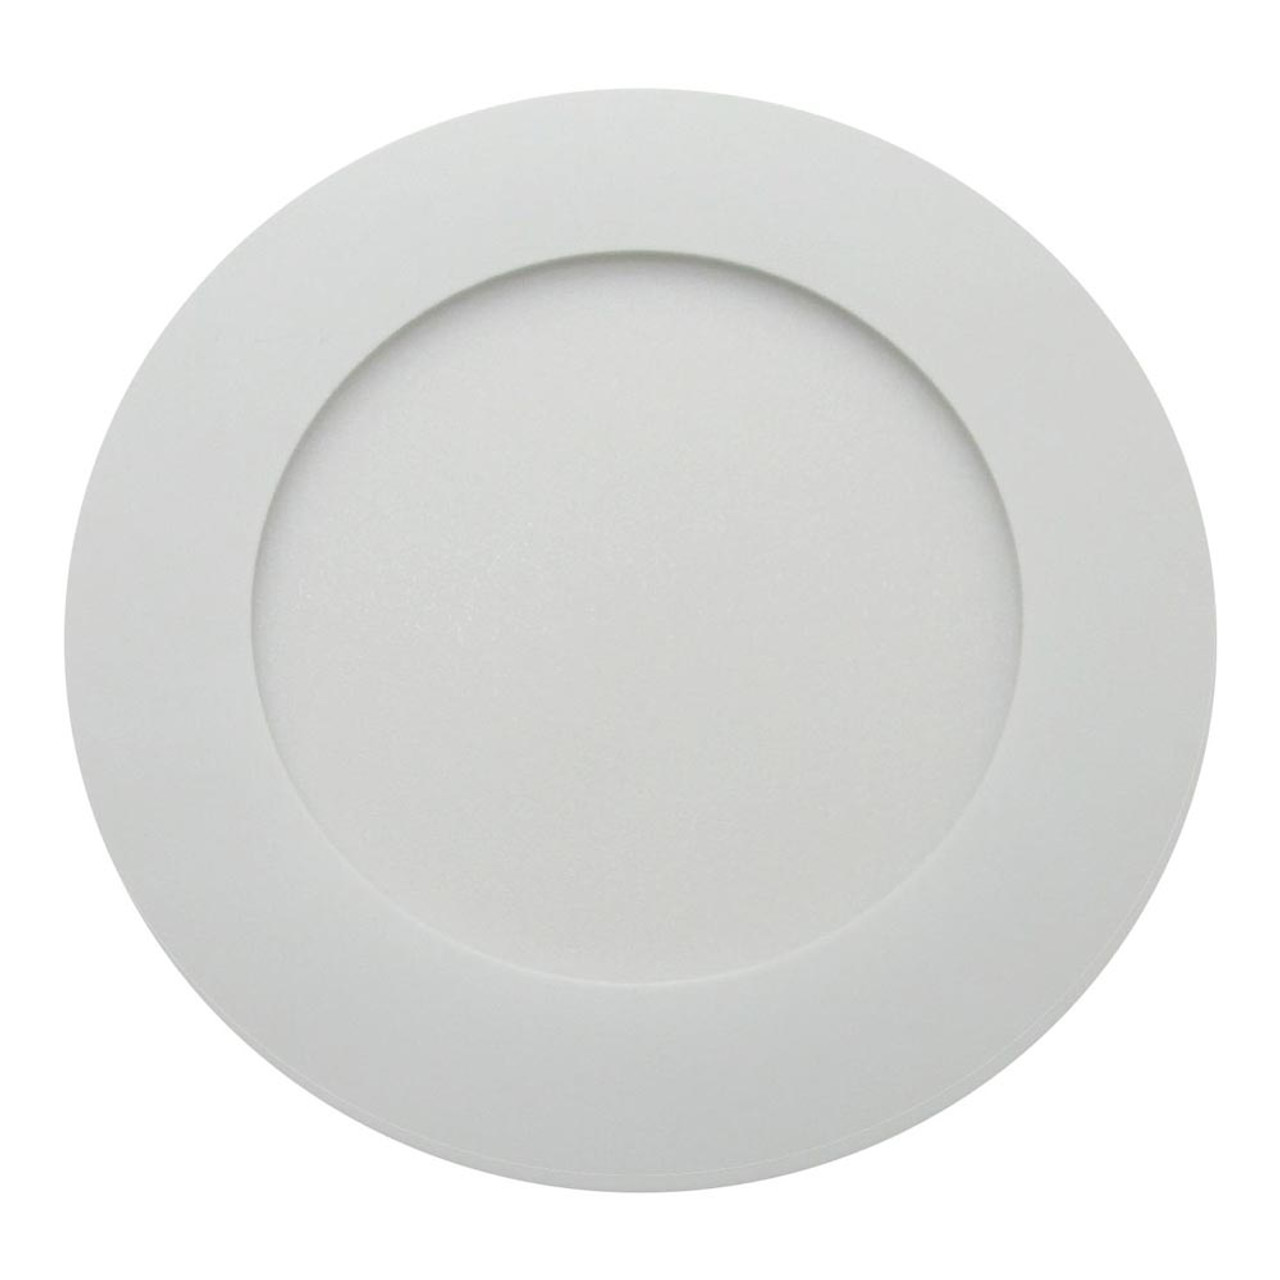 9W ARIAL Round LED Panel 146mm diameter 4000K Emergency(1 year battery guarantee)